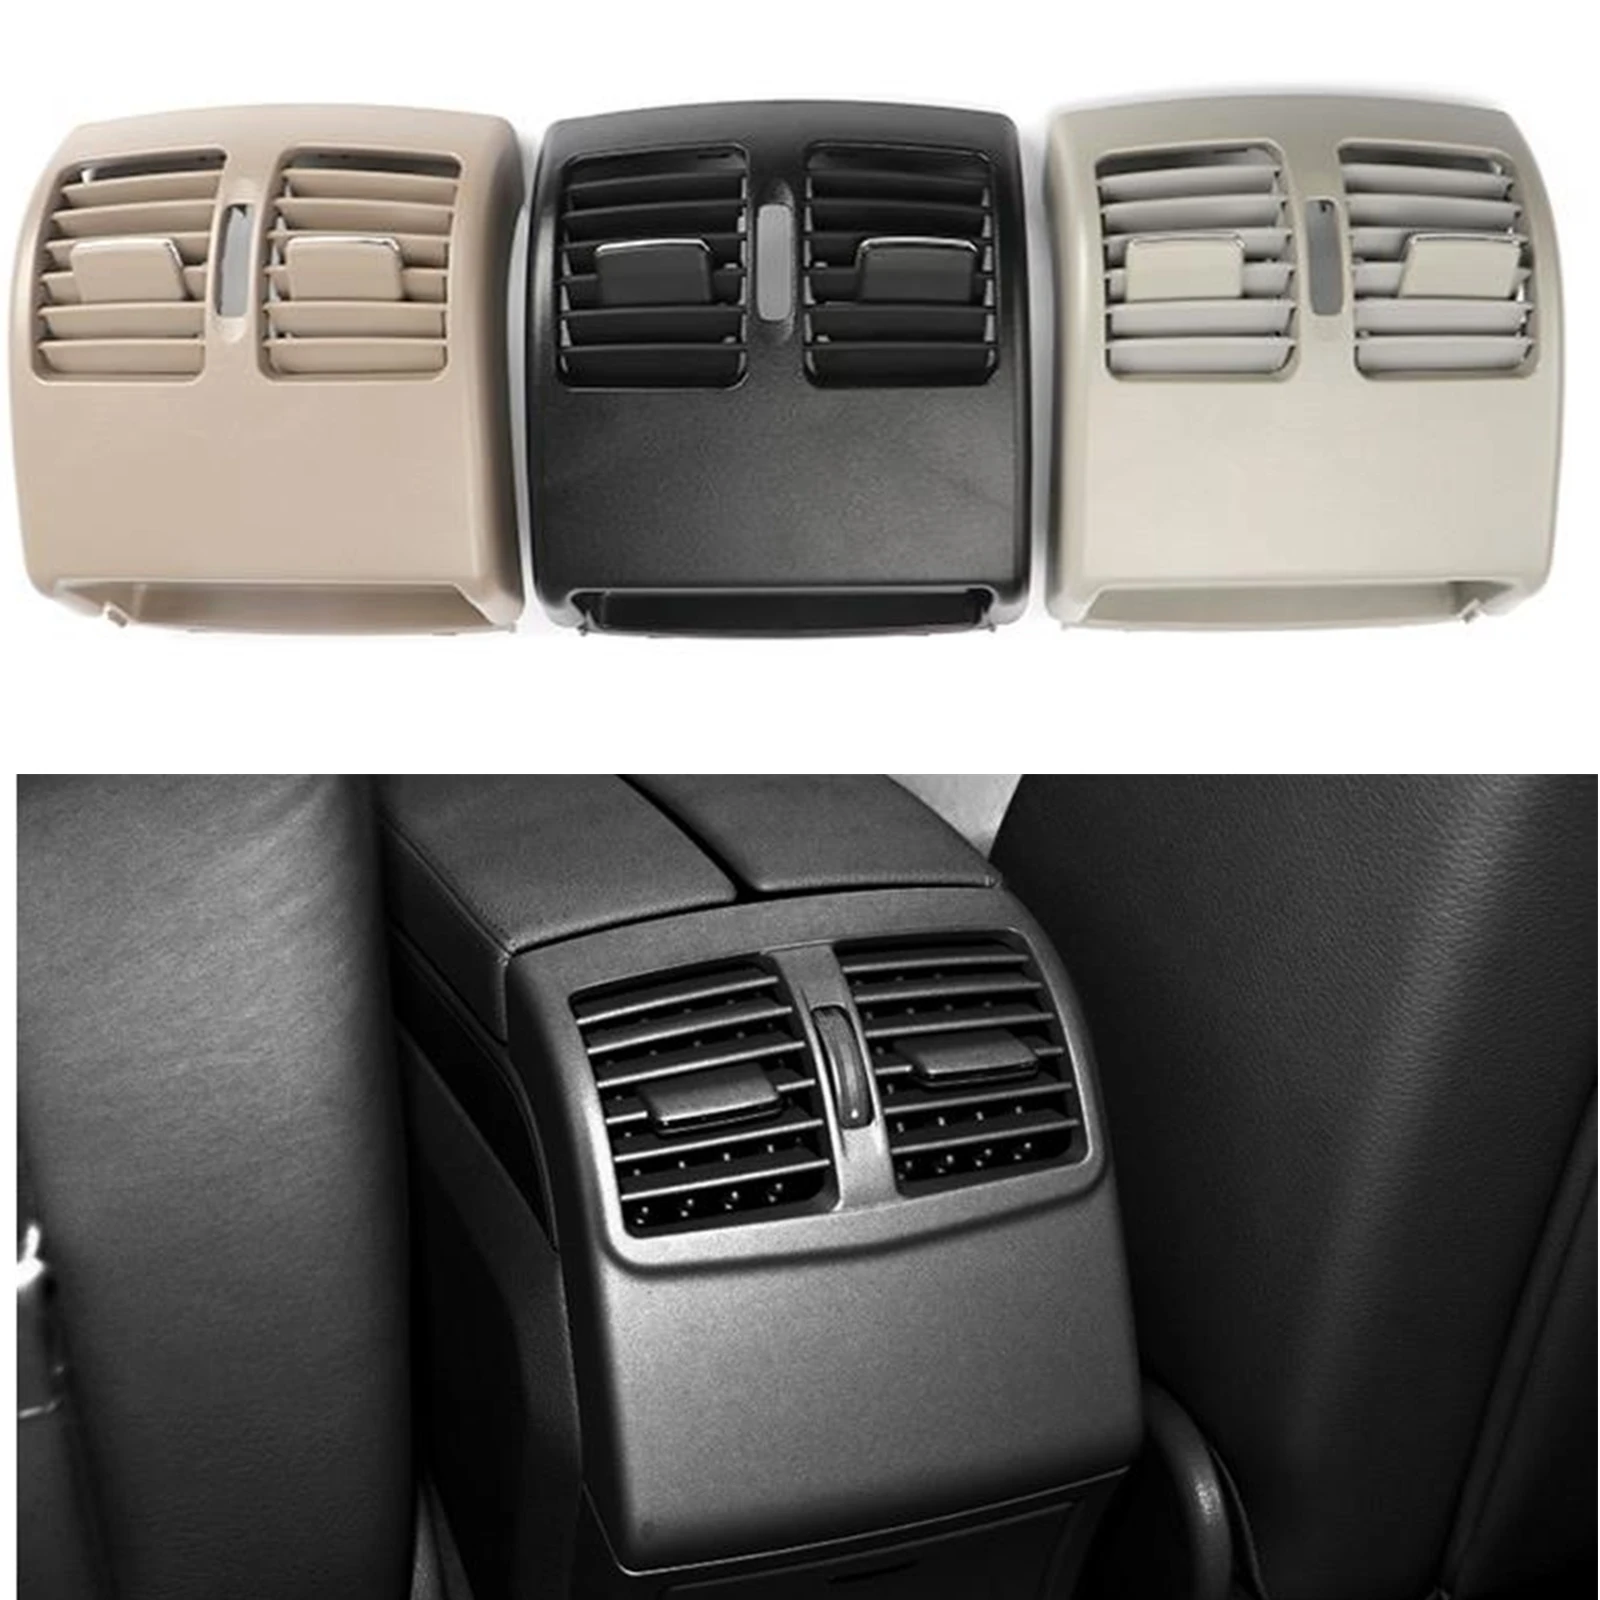 

For Mercedes W212 E Class 2009-2011 Car Rear Center Console Fresh Flow Air Conditioning Outlet Vent Grille Grill Cover Black Kit